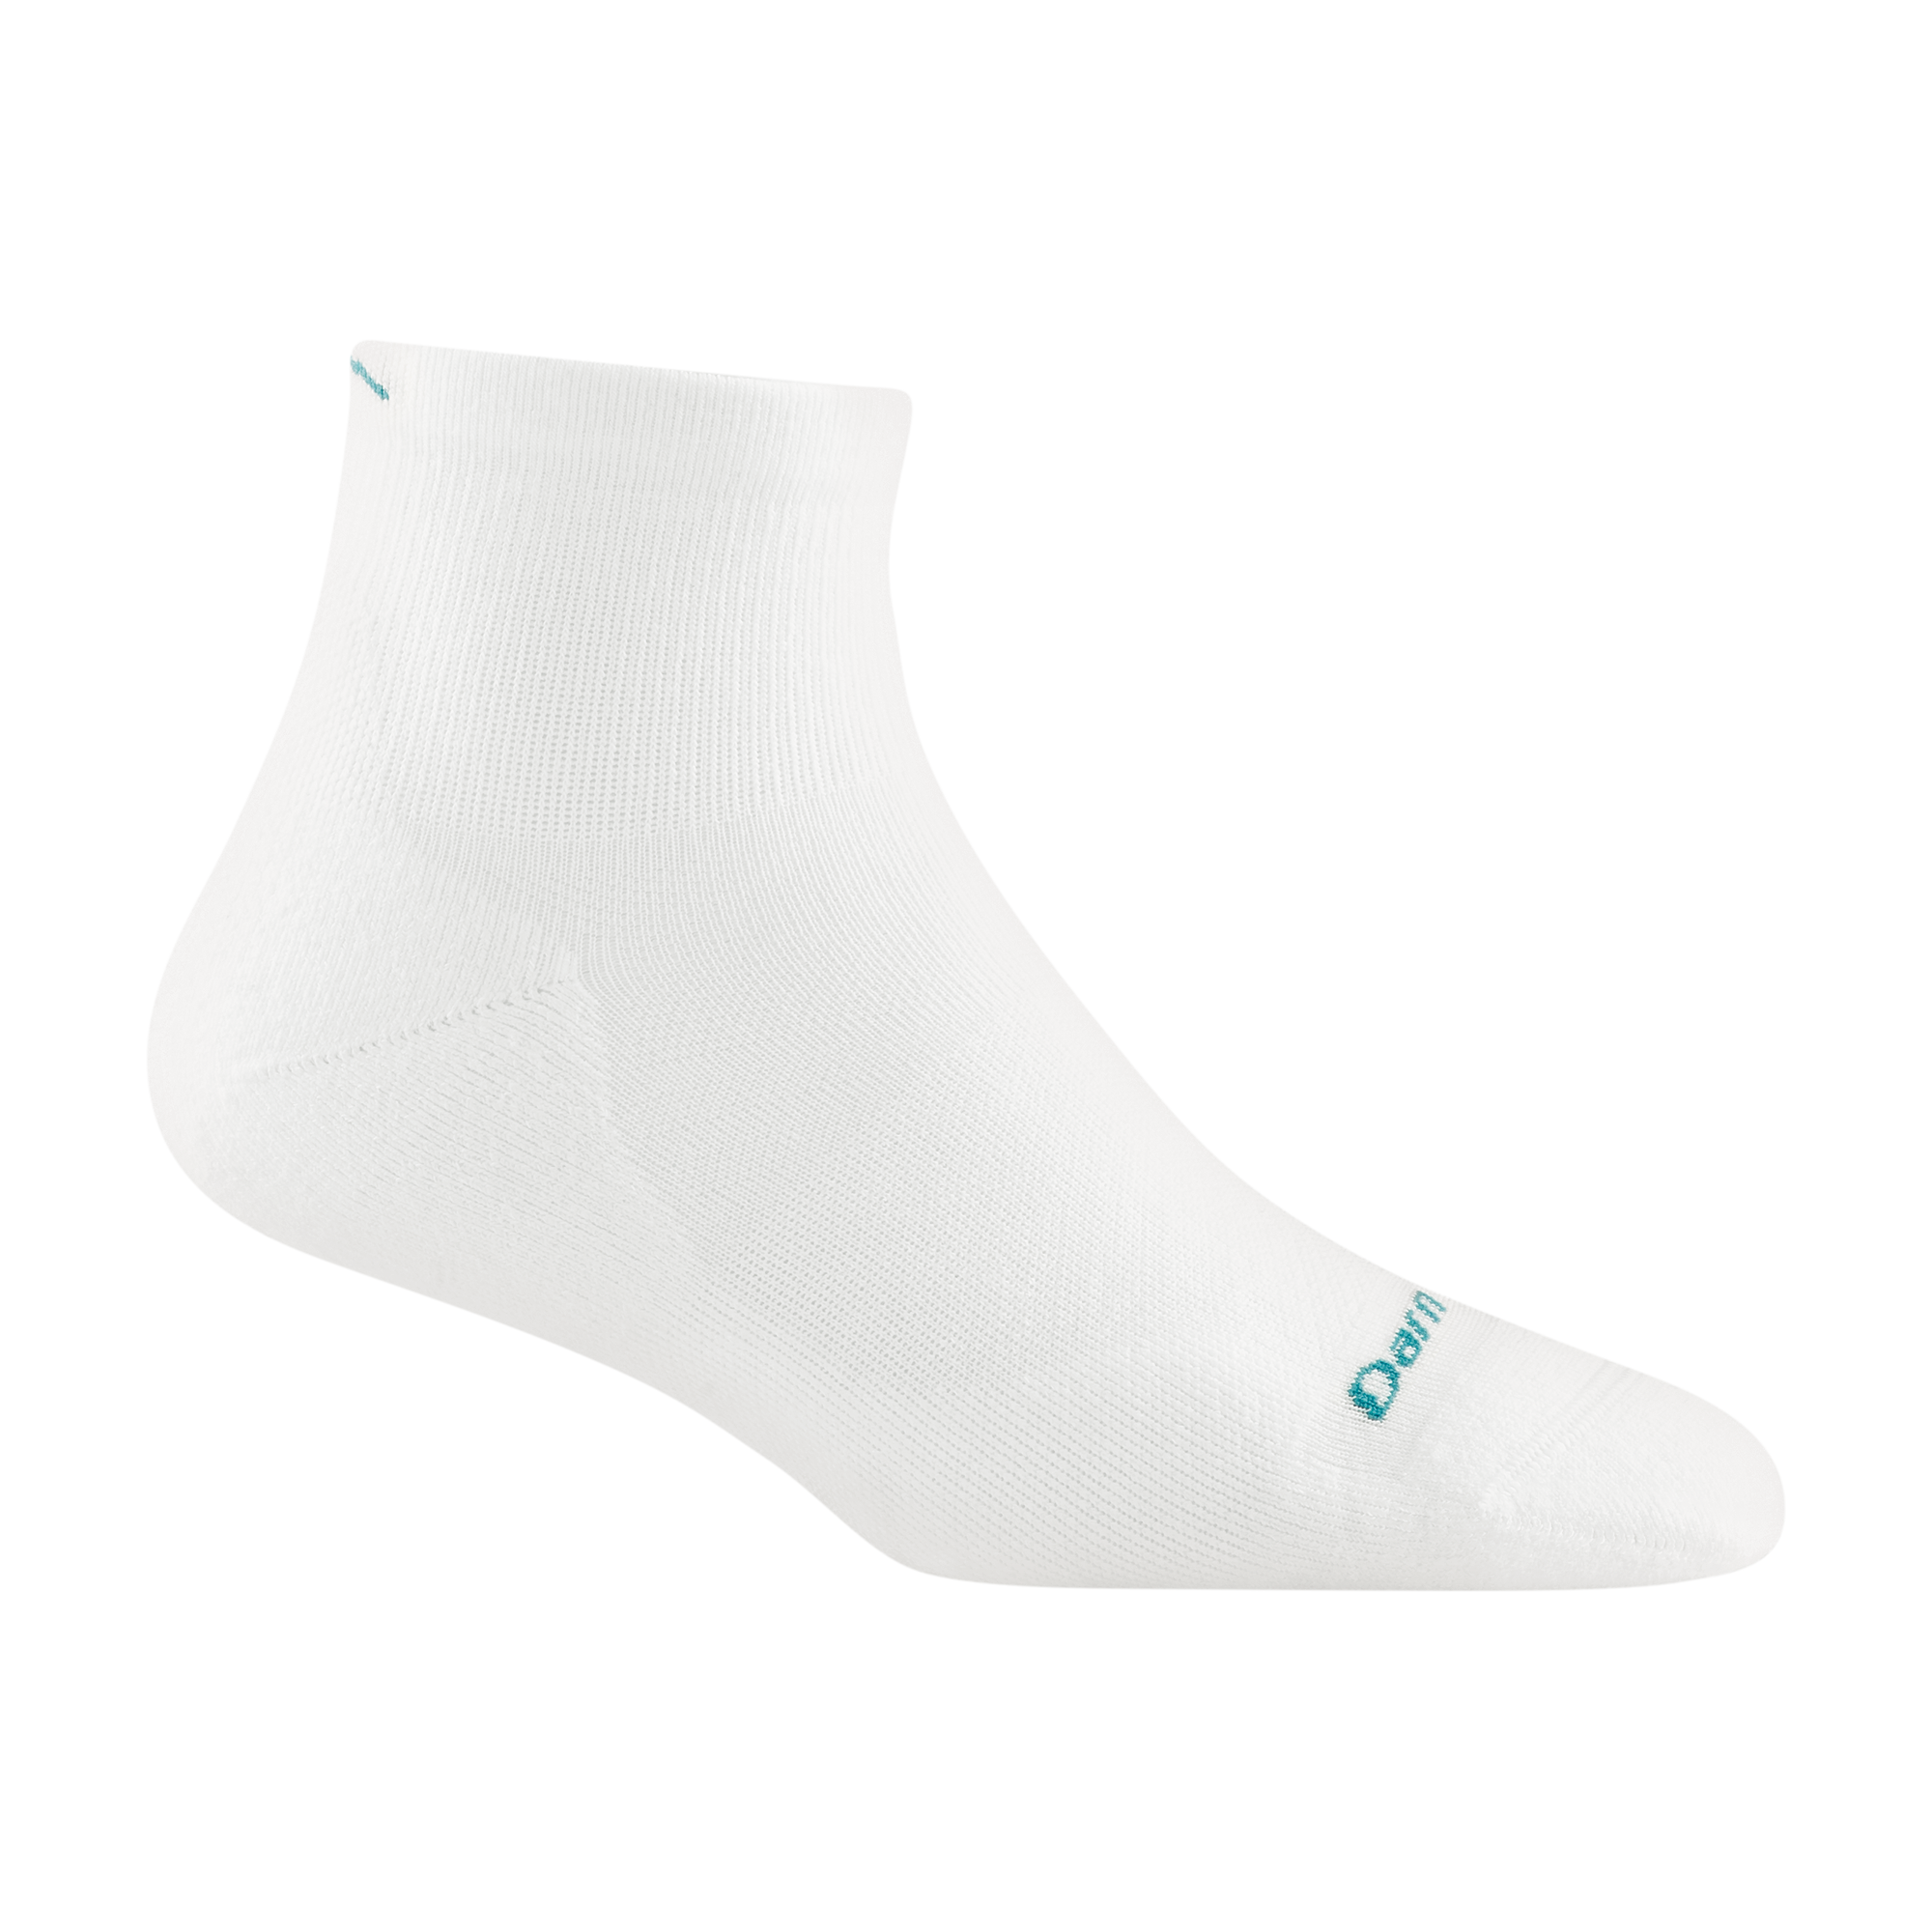 1048 women's quarter running sock in white with teal darn tough signature on forefoot